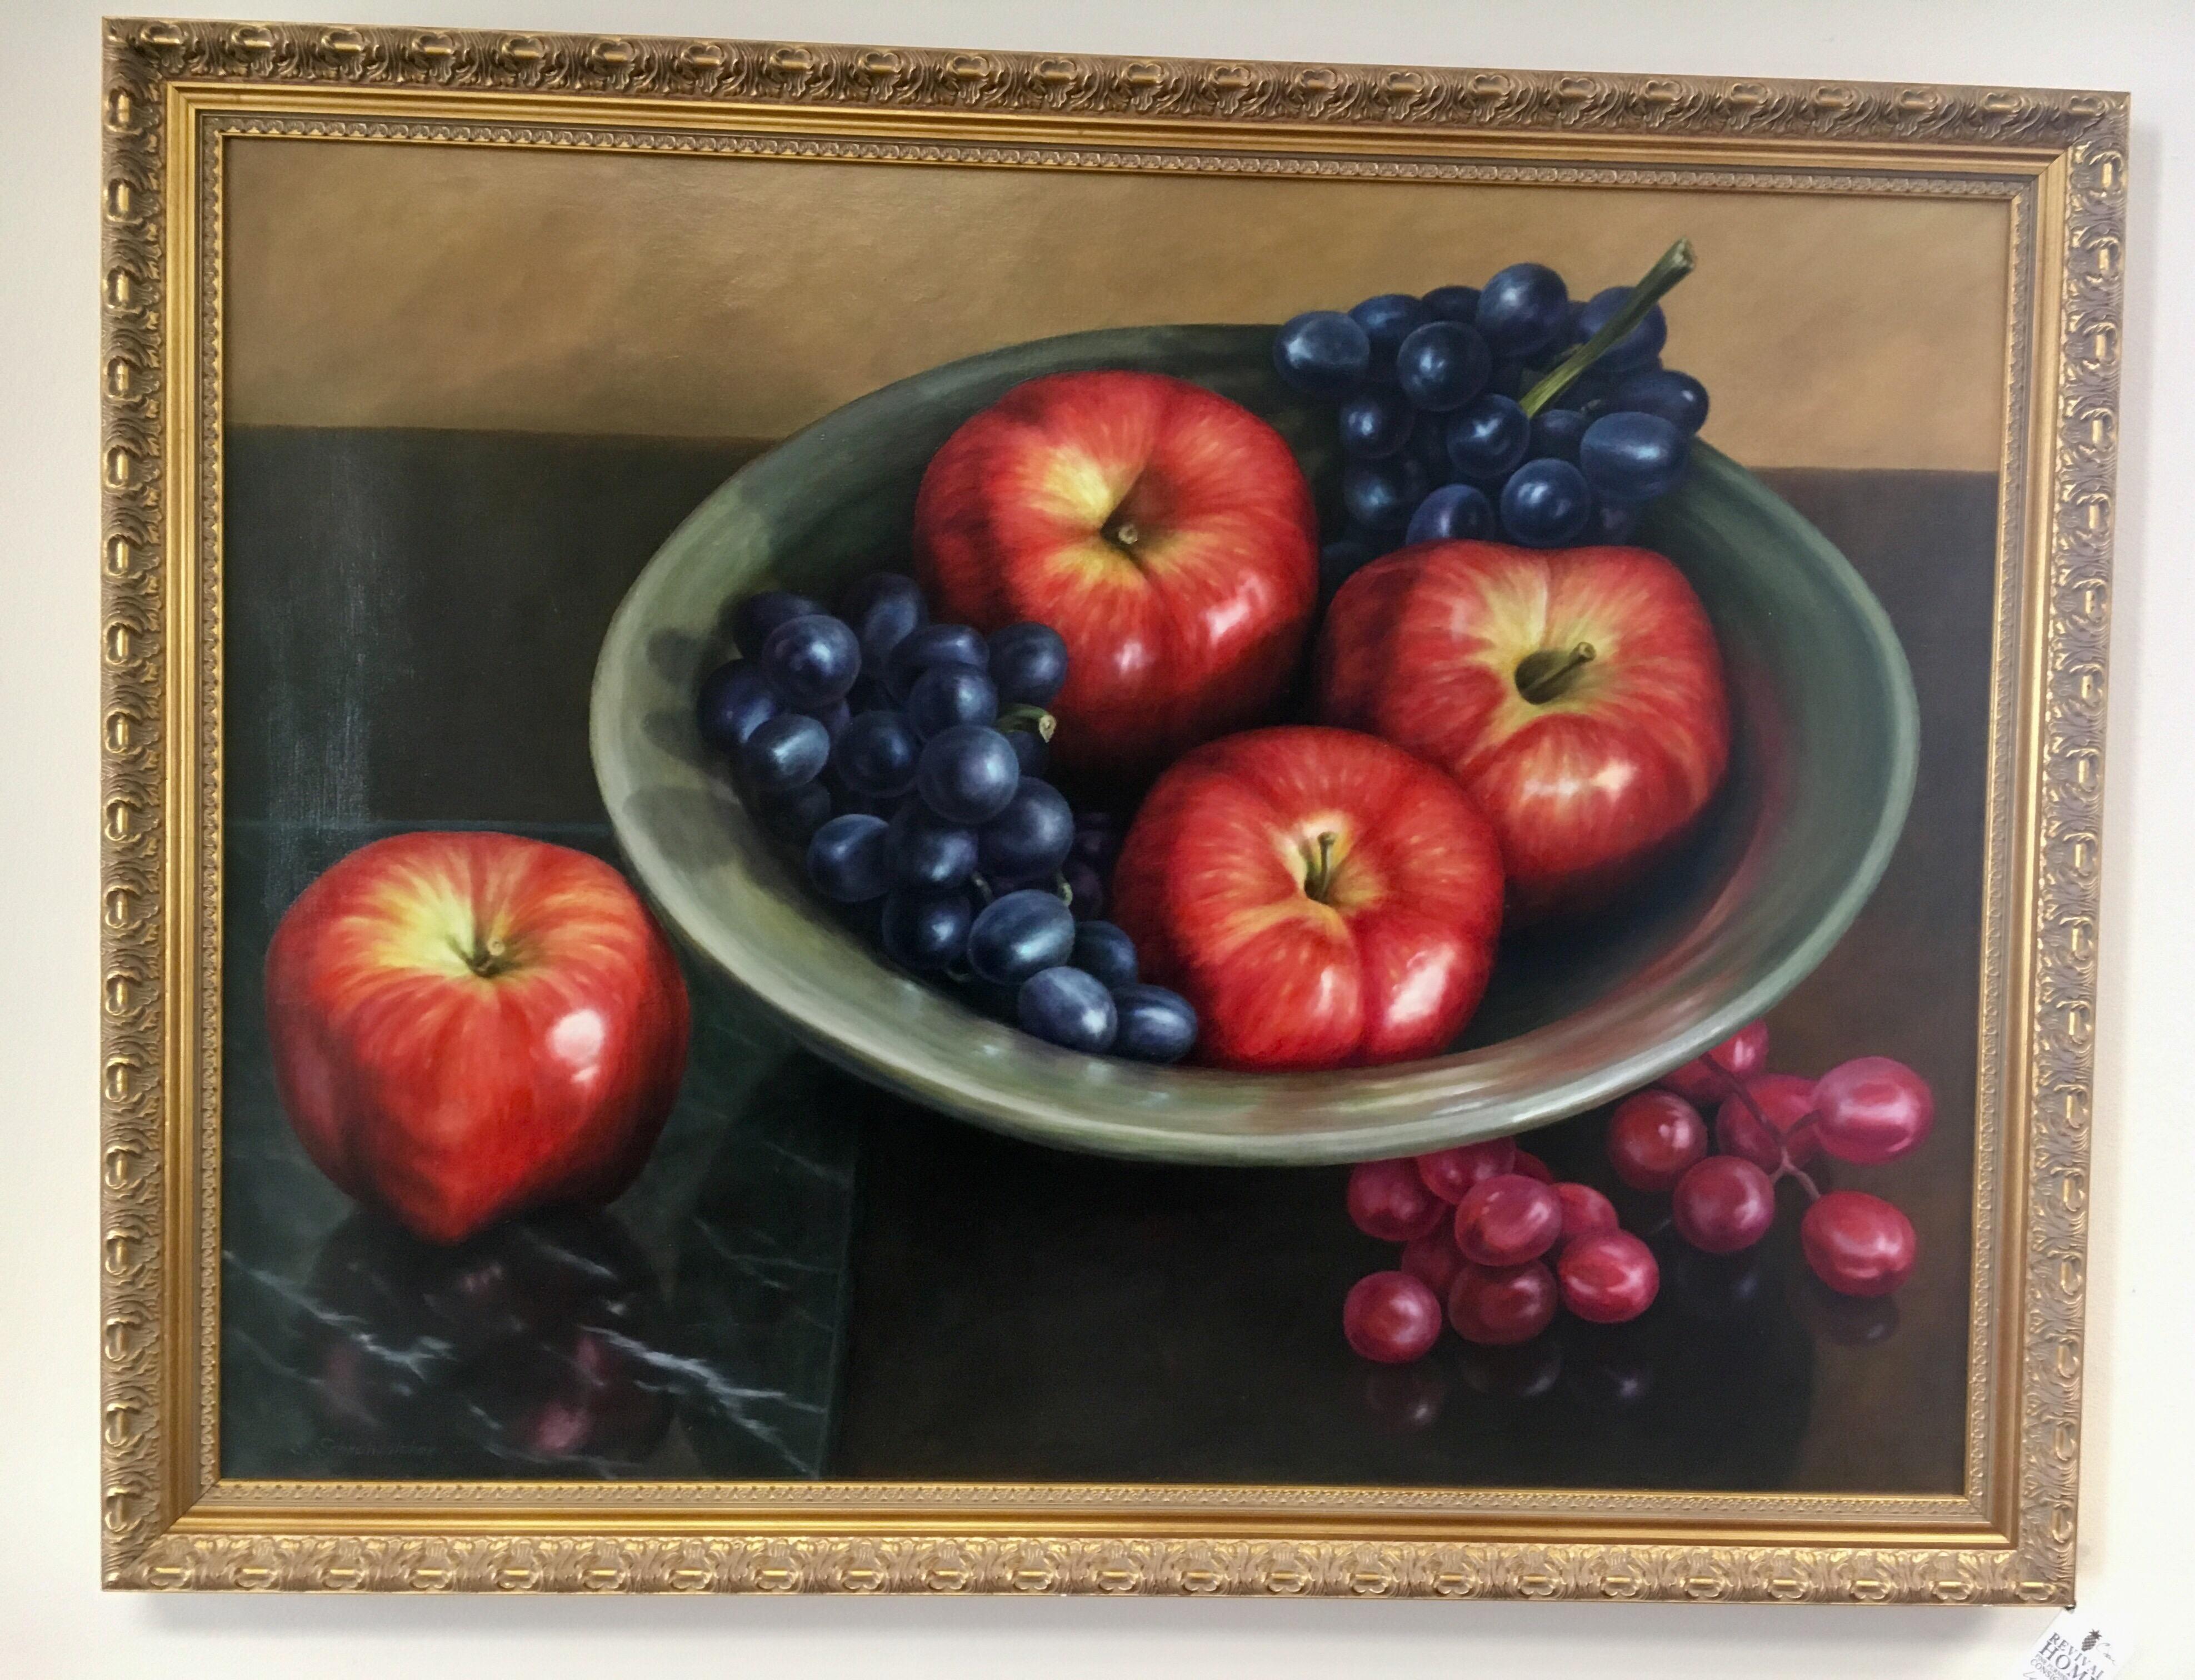 Original 1970s oil on canvas in beautiful frame by the artist S. Schrohenlofer. Medium is oil on canvas.
Colors are vibrant and the talent of the artist is unquestionable.